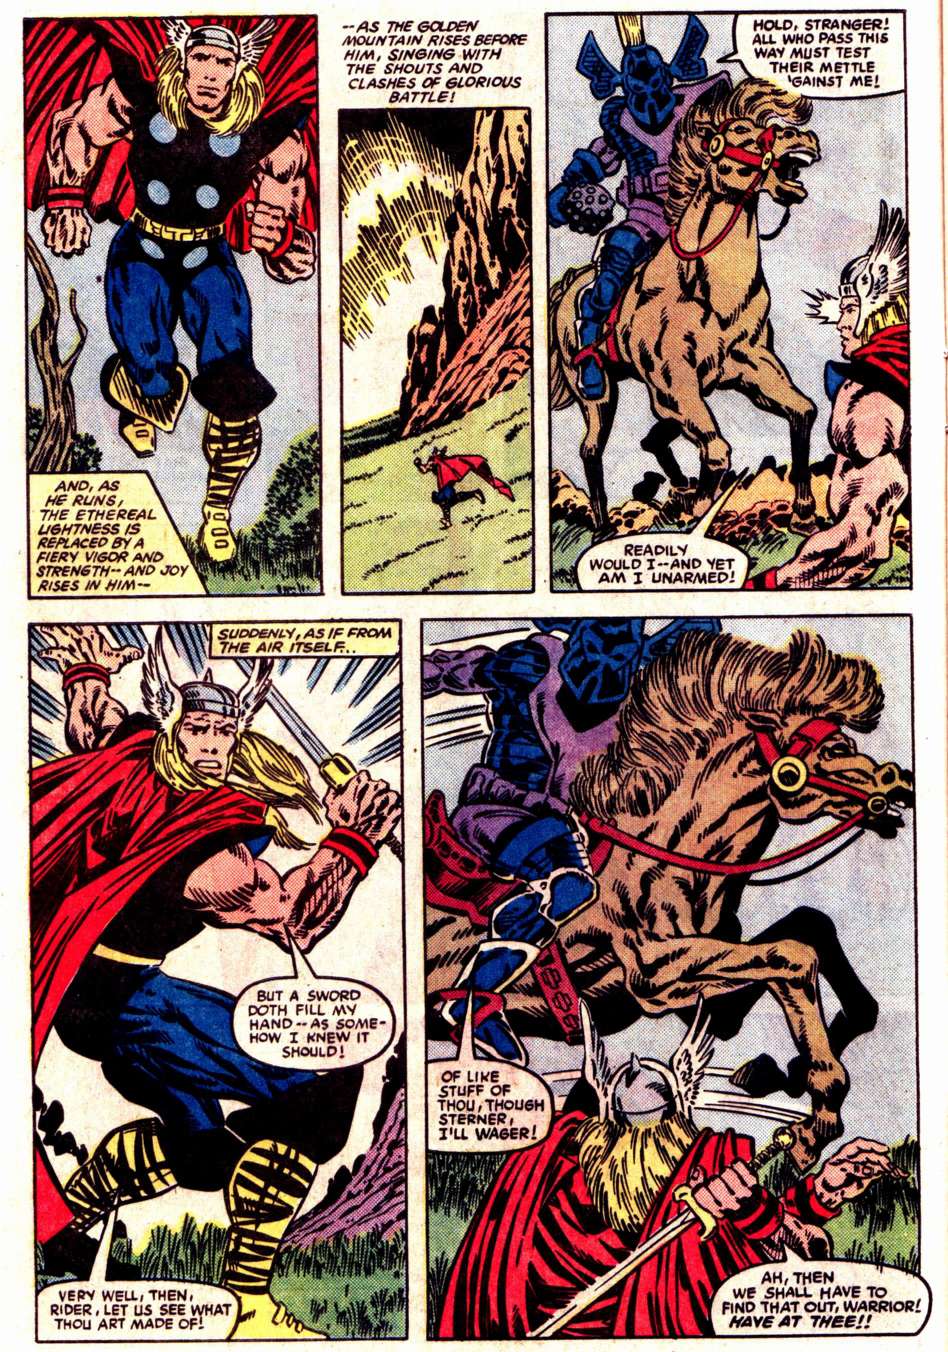 What If? (1977) issue 47 - Loki had found The hammer of Thor - Page 15